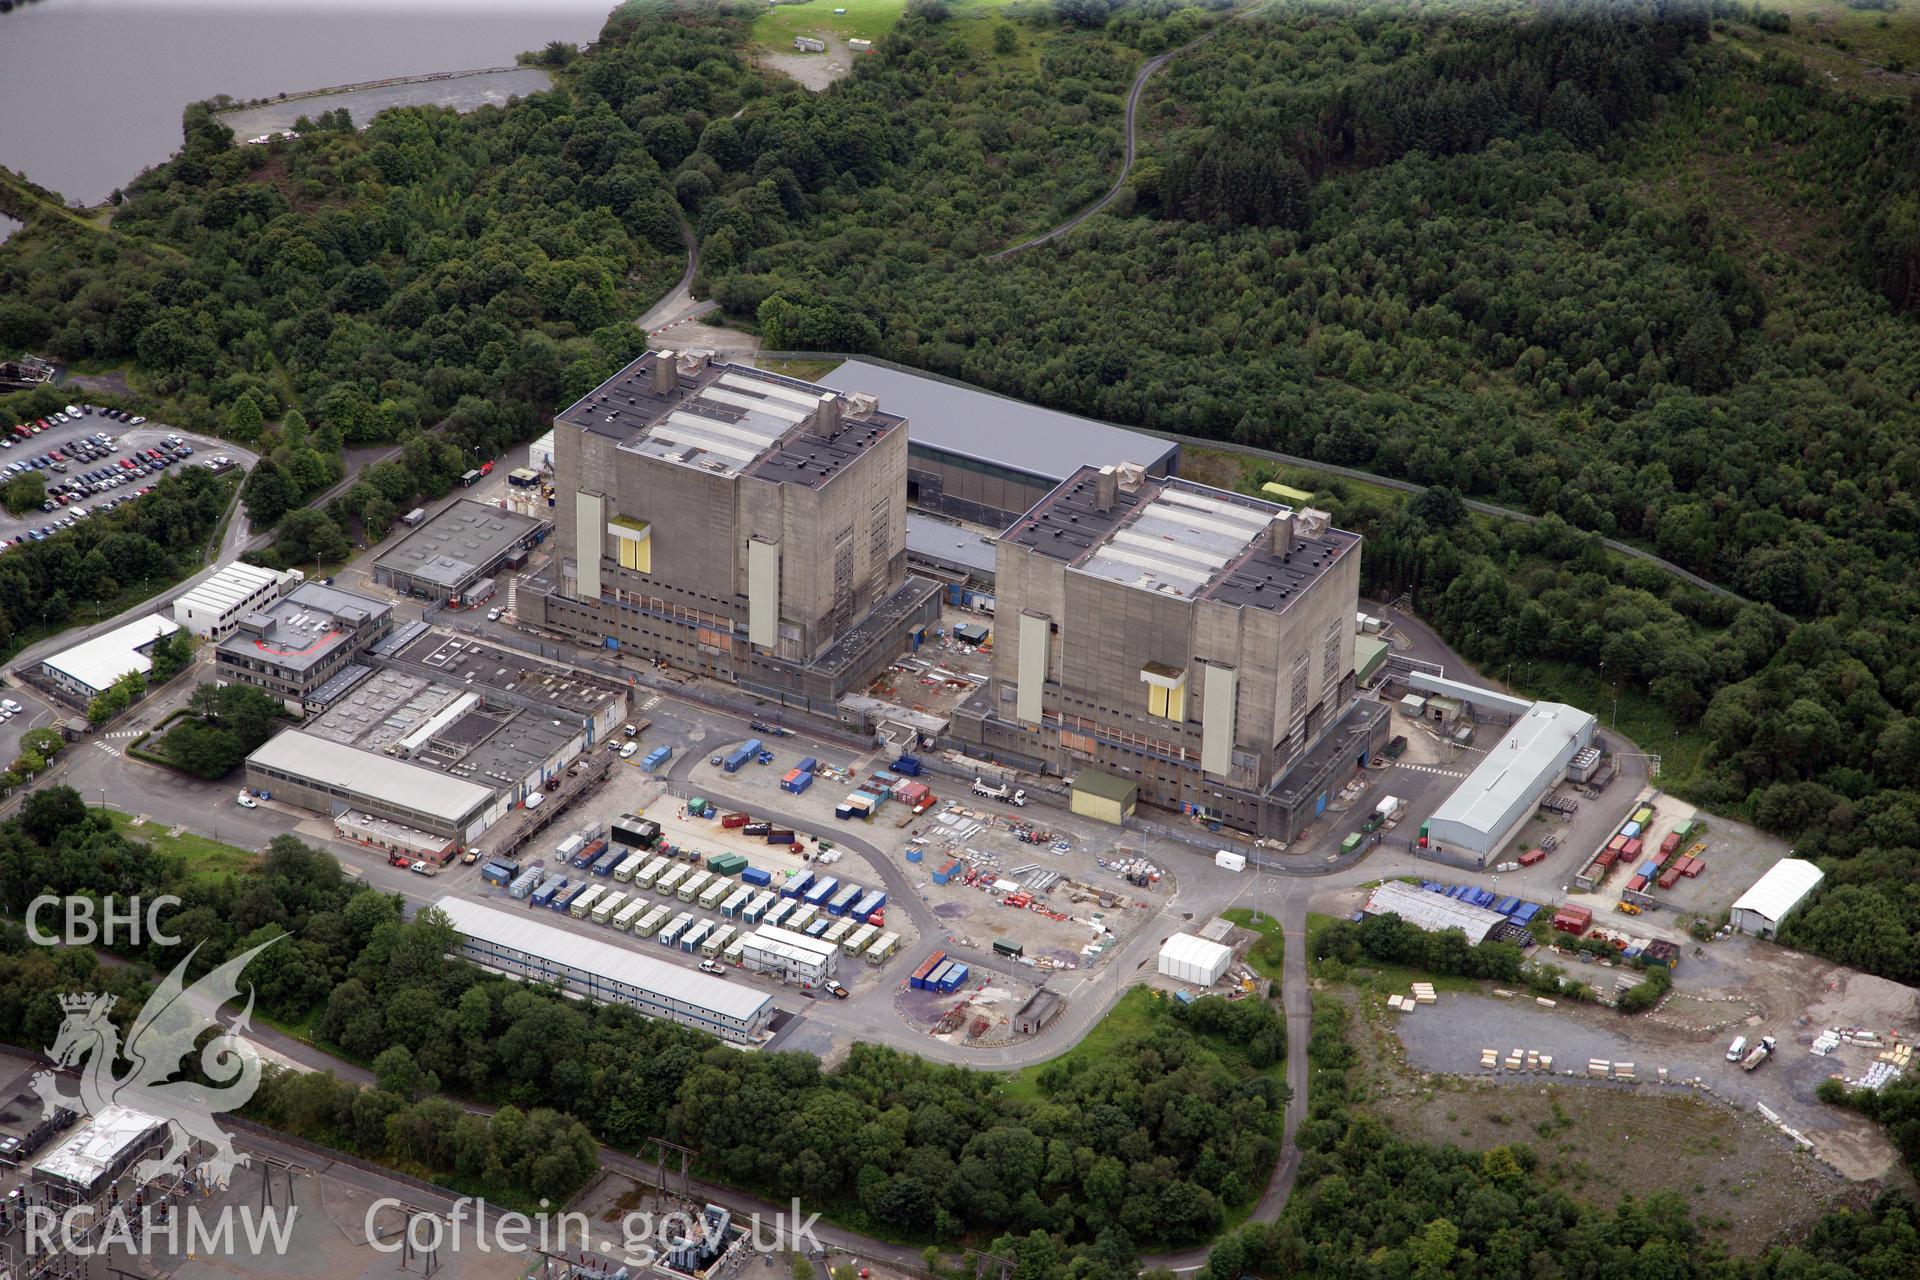 RCAHMW colour oblique photograph of Trawsfynydd Power Station, Gellilydan. Taken by Toby Driver on 17/08/2011.